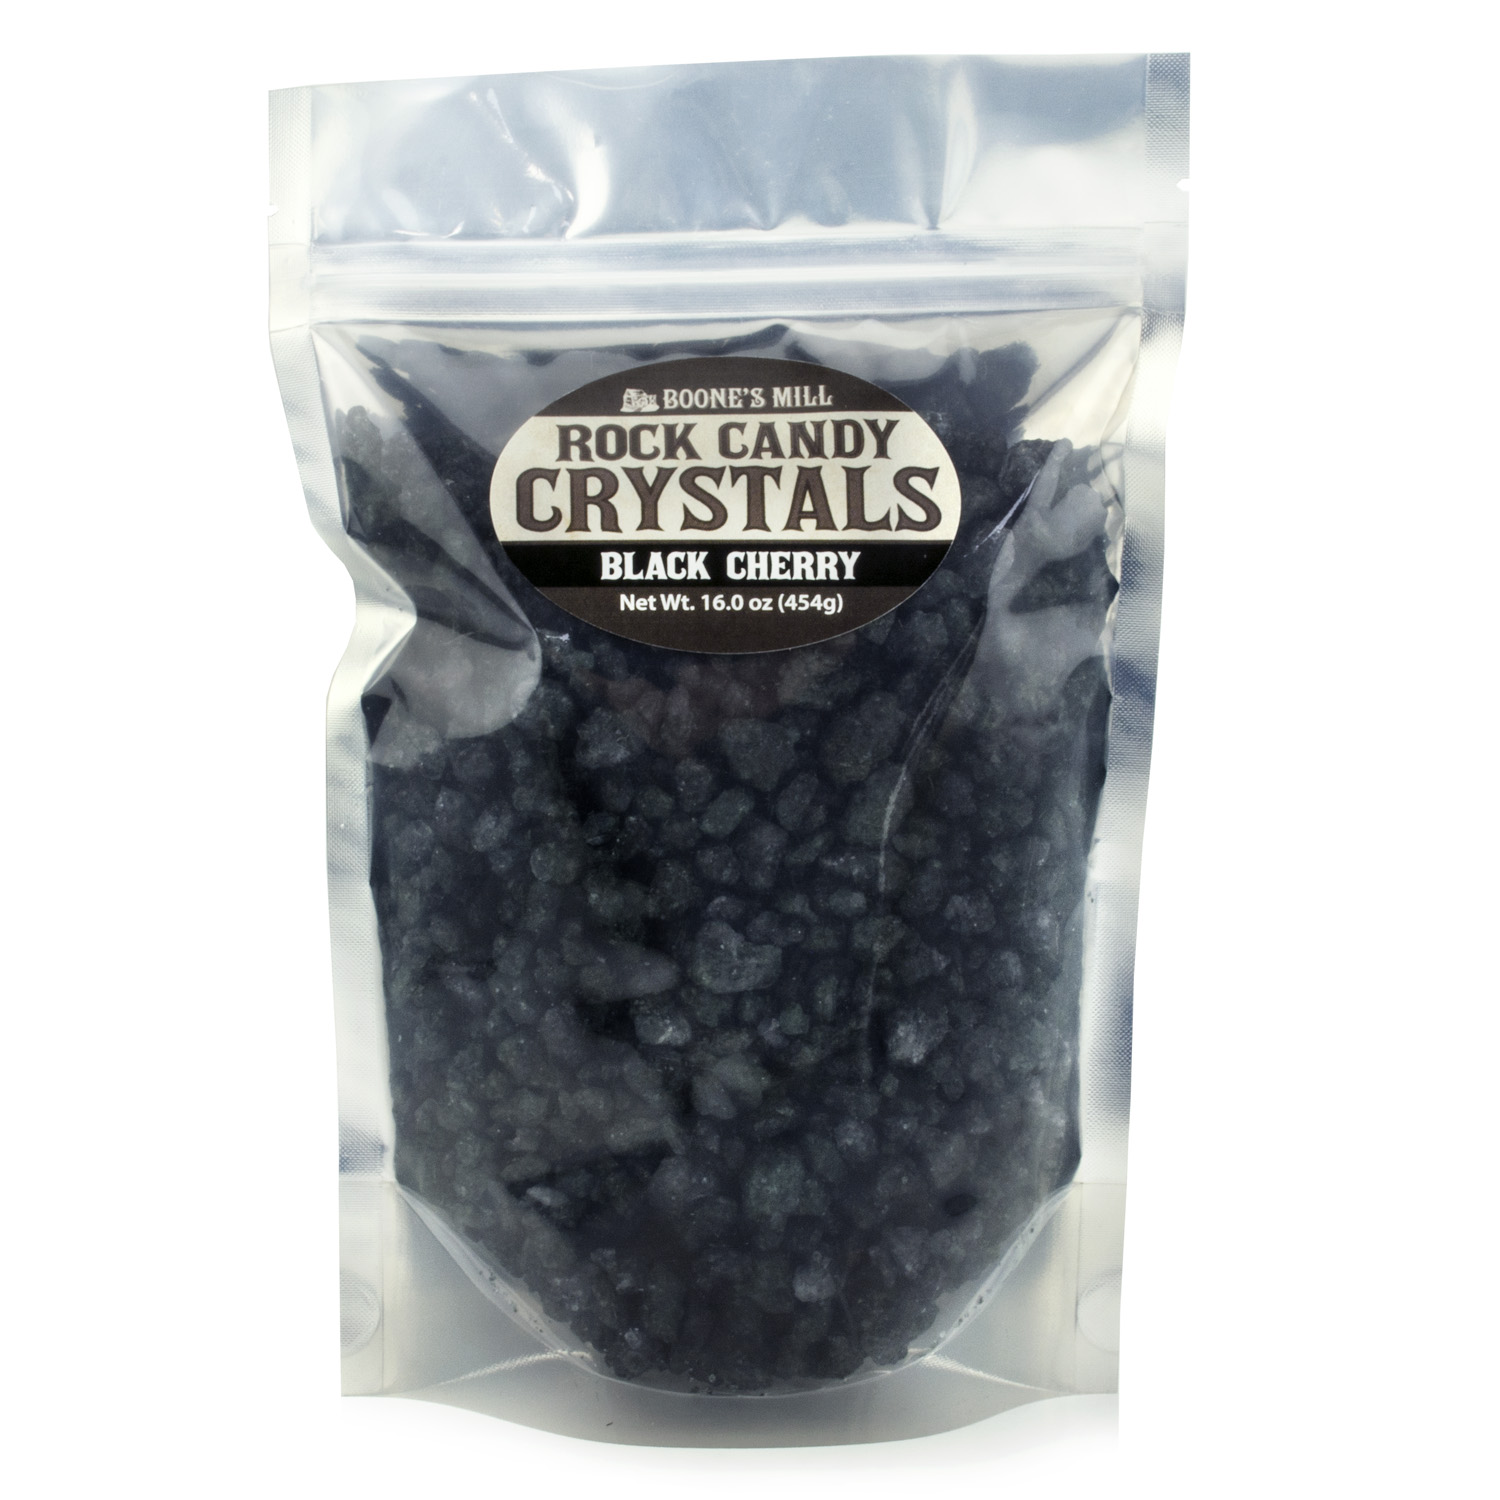 Rock Candy Crystals Black Cherry